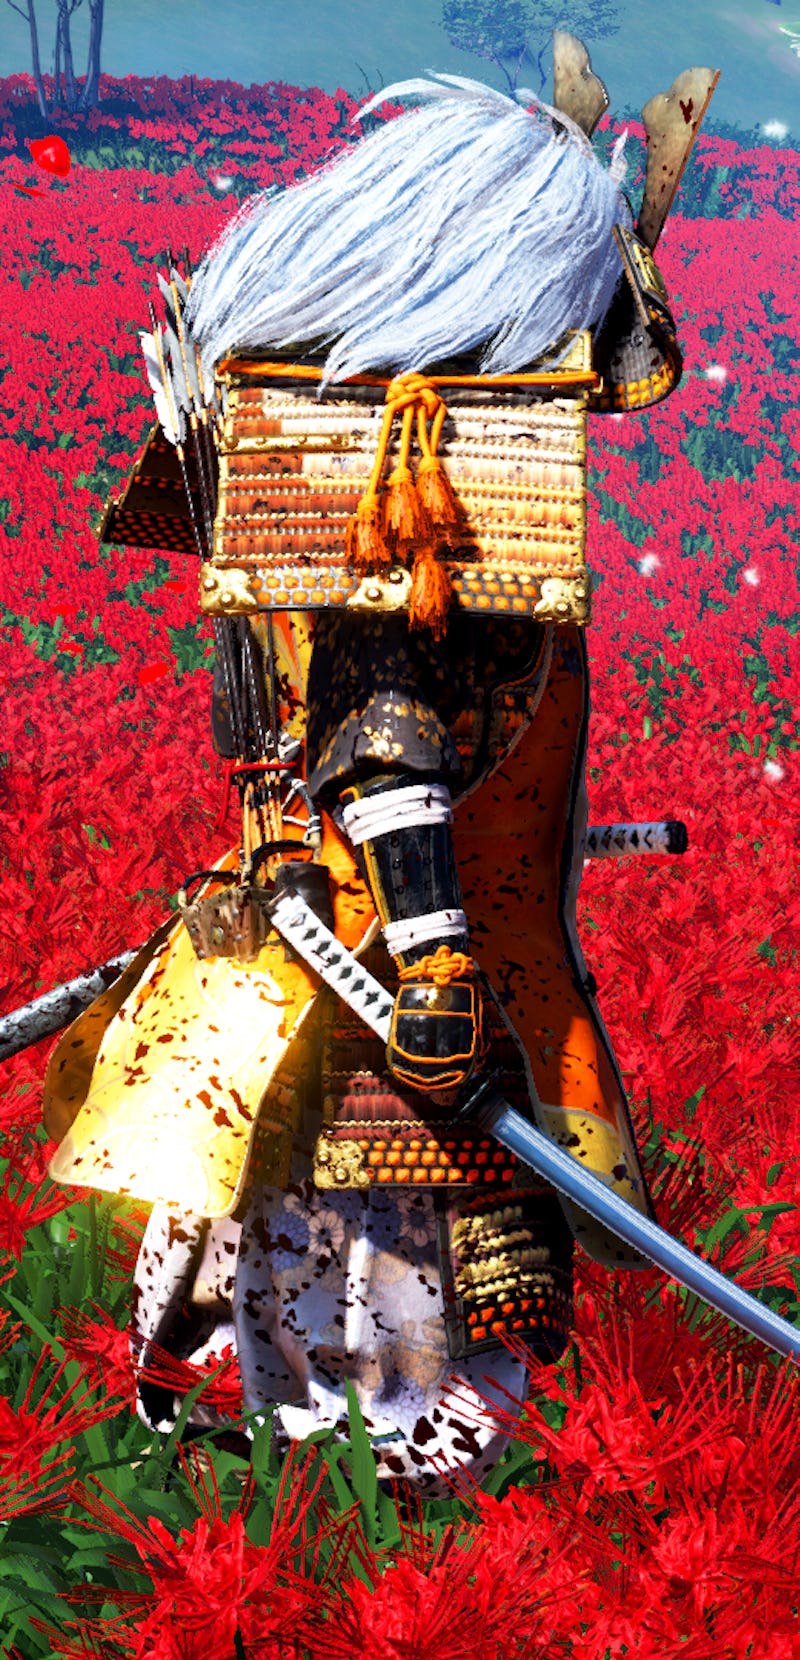 One of the 5 most powerful Ghost of Tsushima armor sets in yellow and black